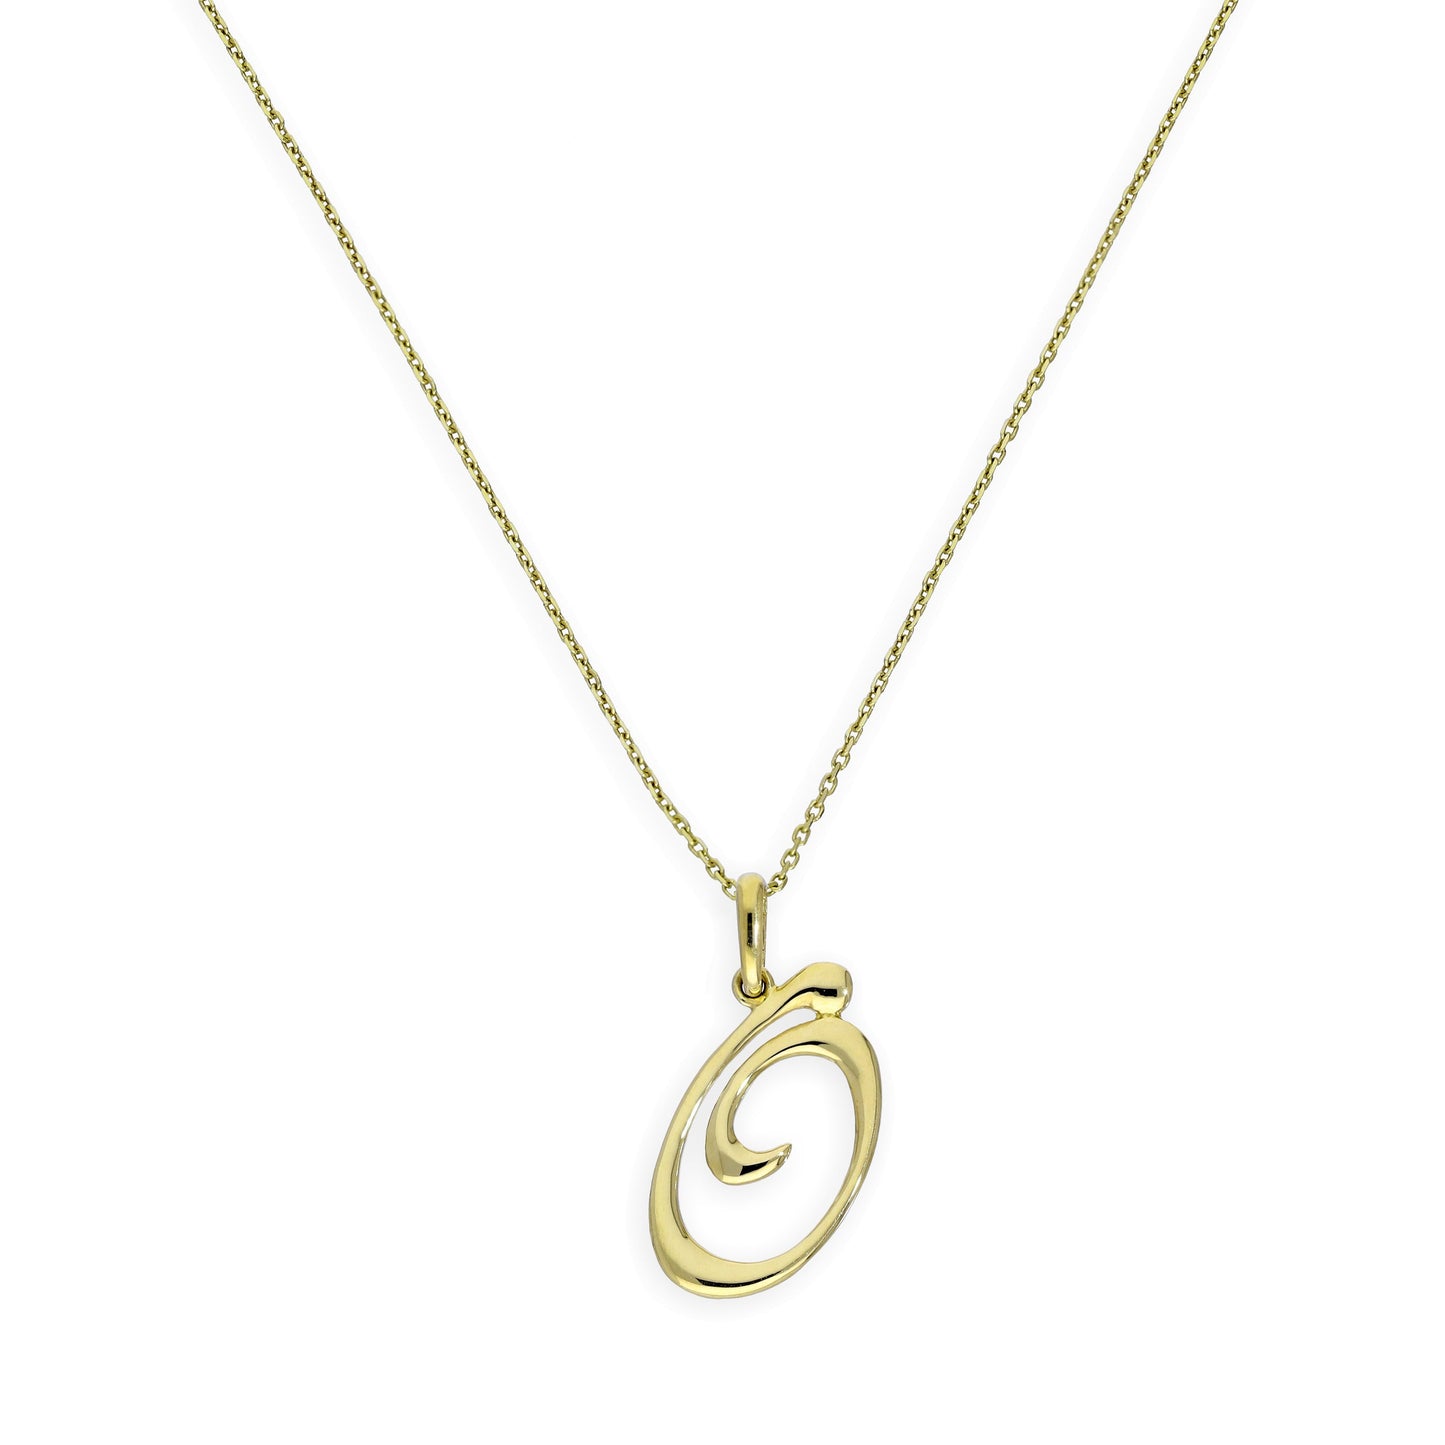 9ct Gold Fancy Calligraphy Script Letter O Pendant Necklace 16 - 20 Inches